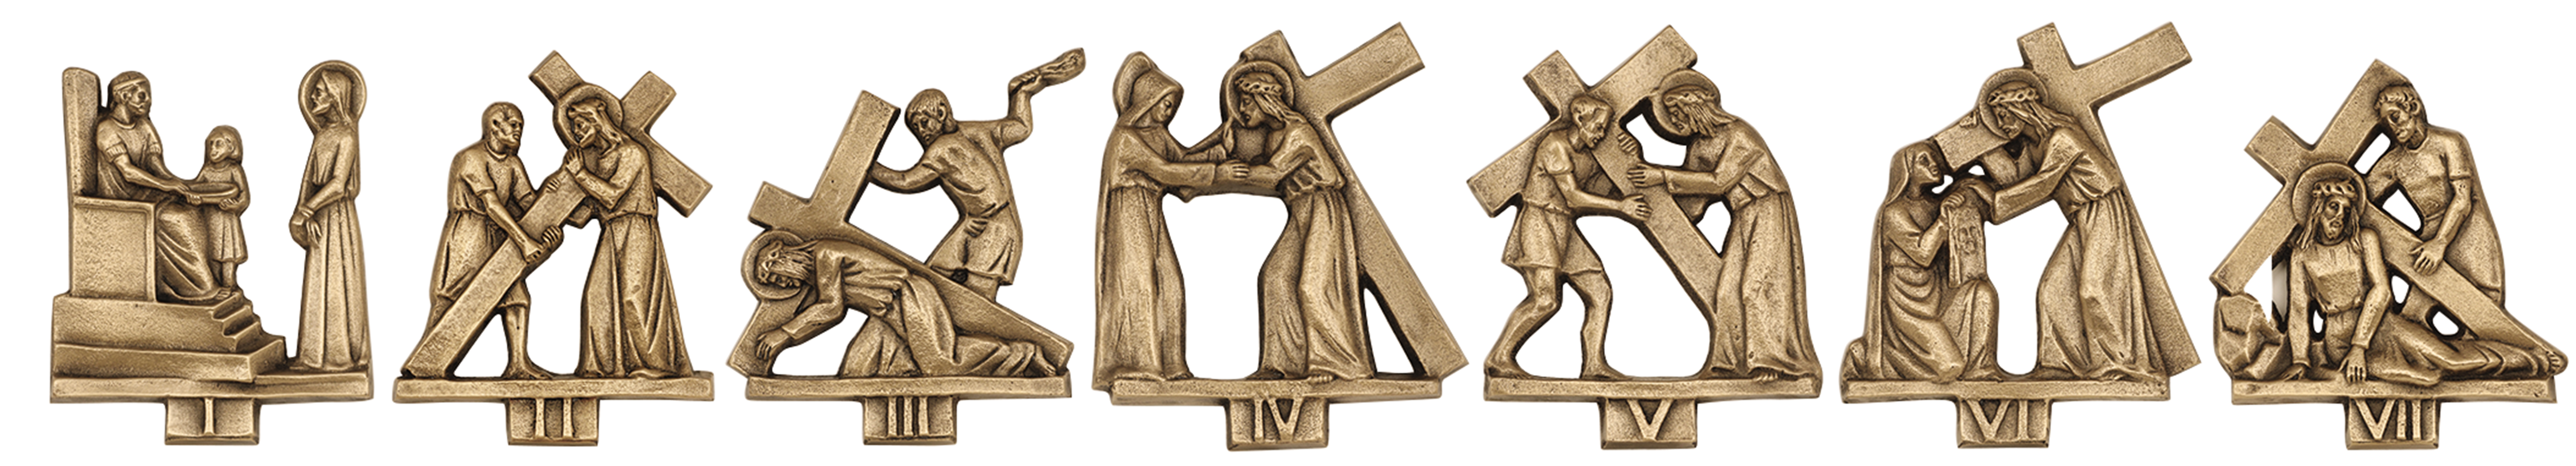 K379B Stations of the Cross